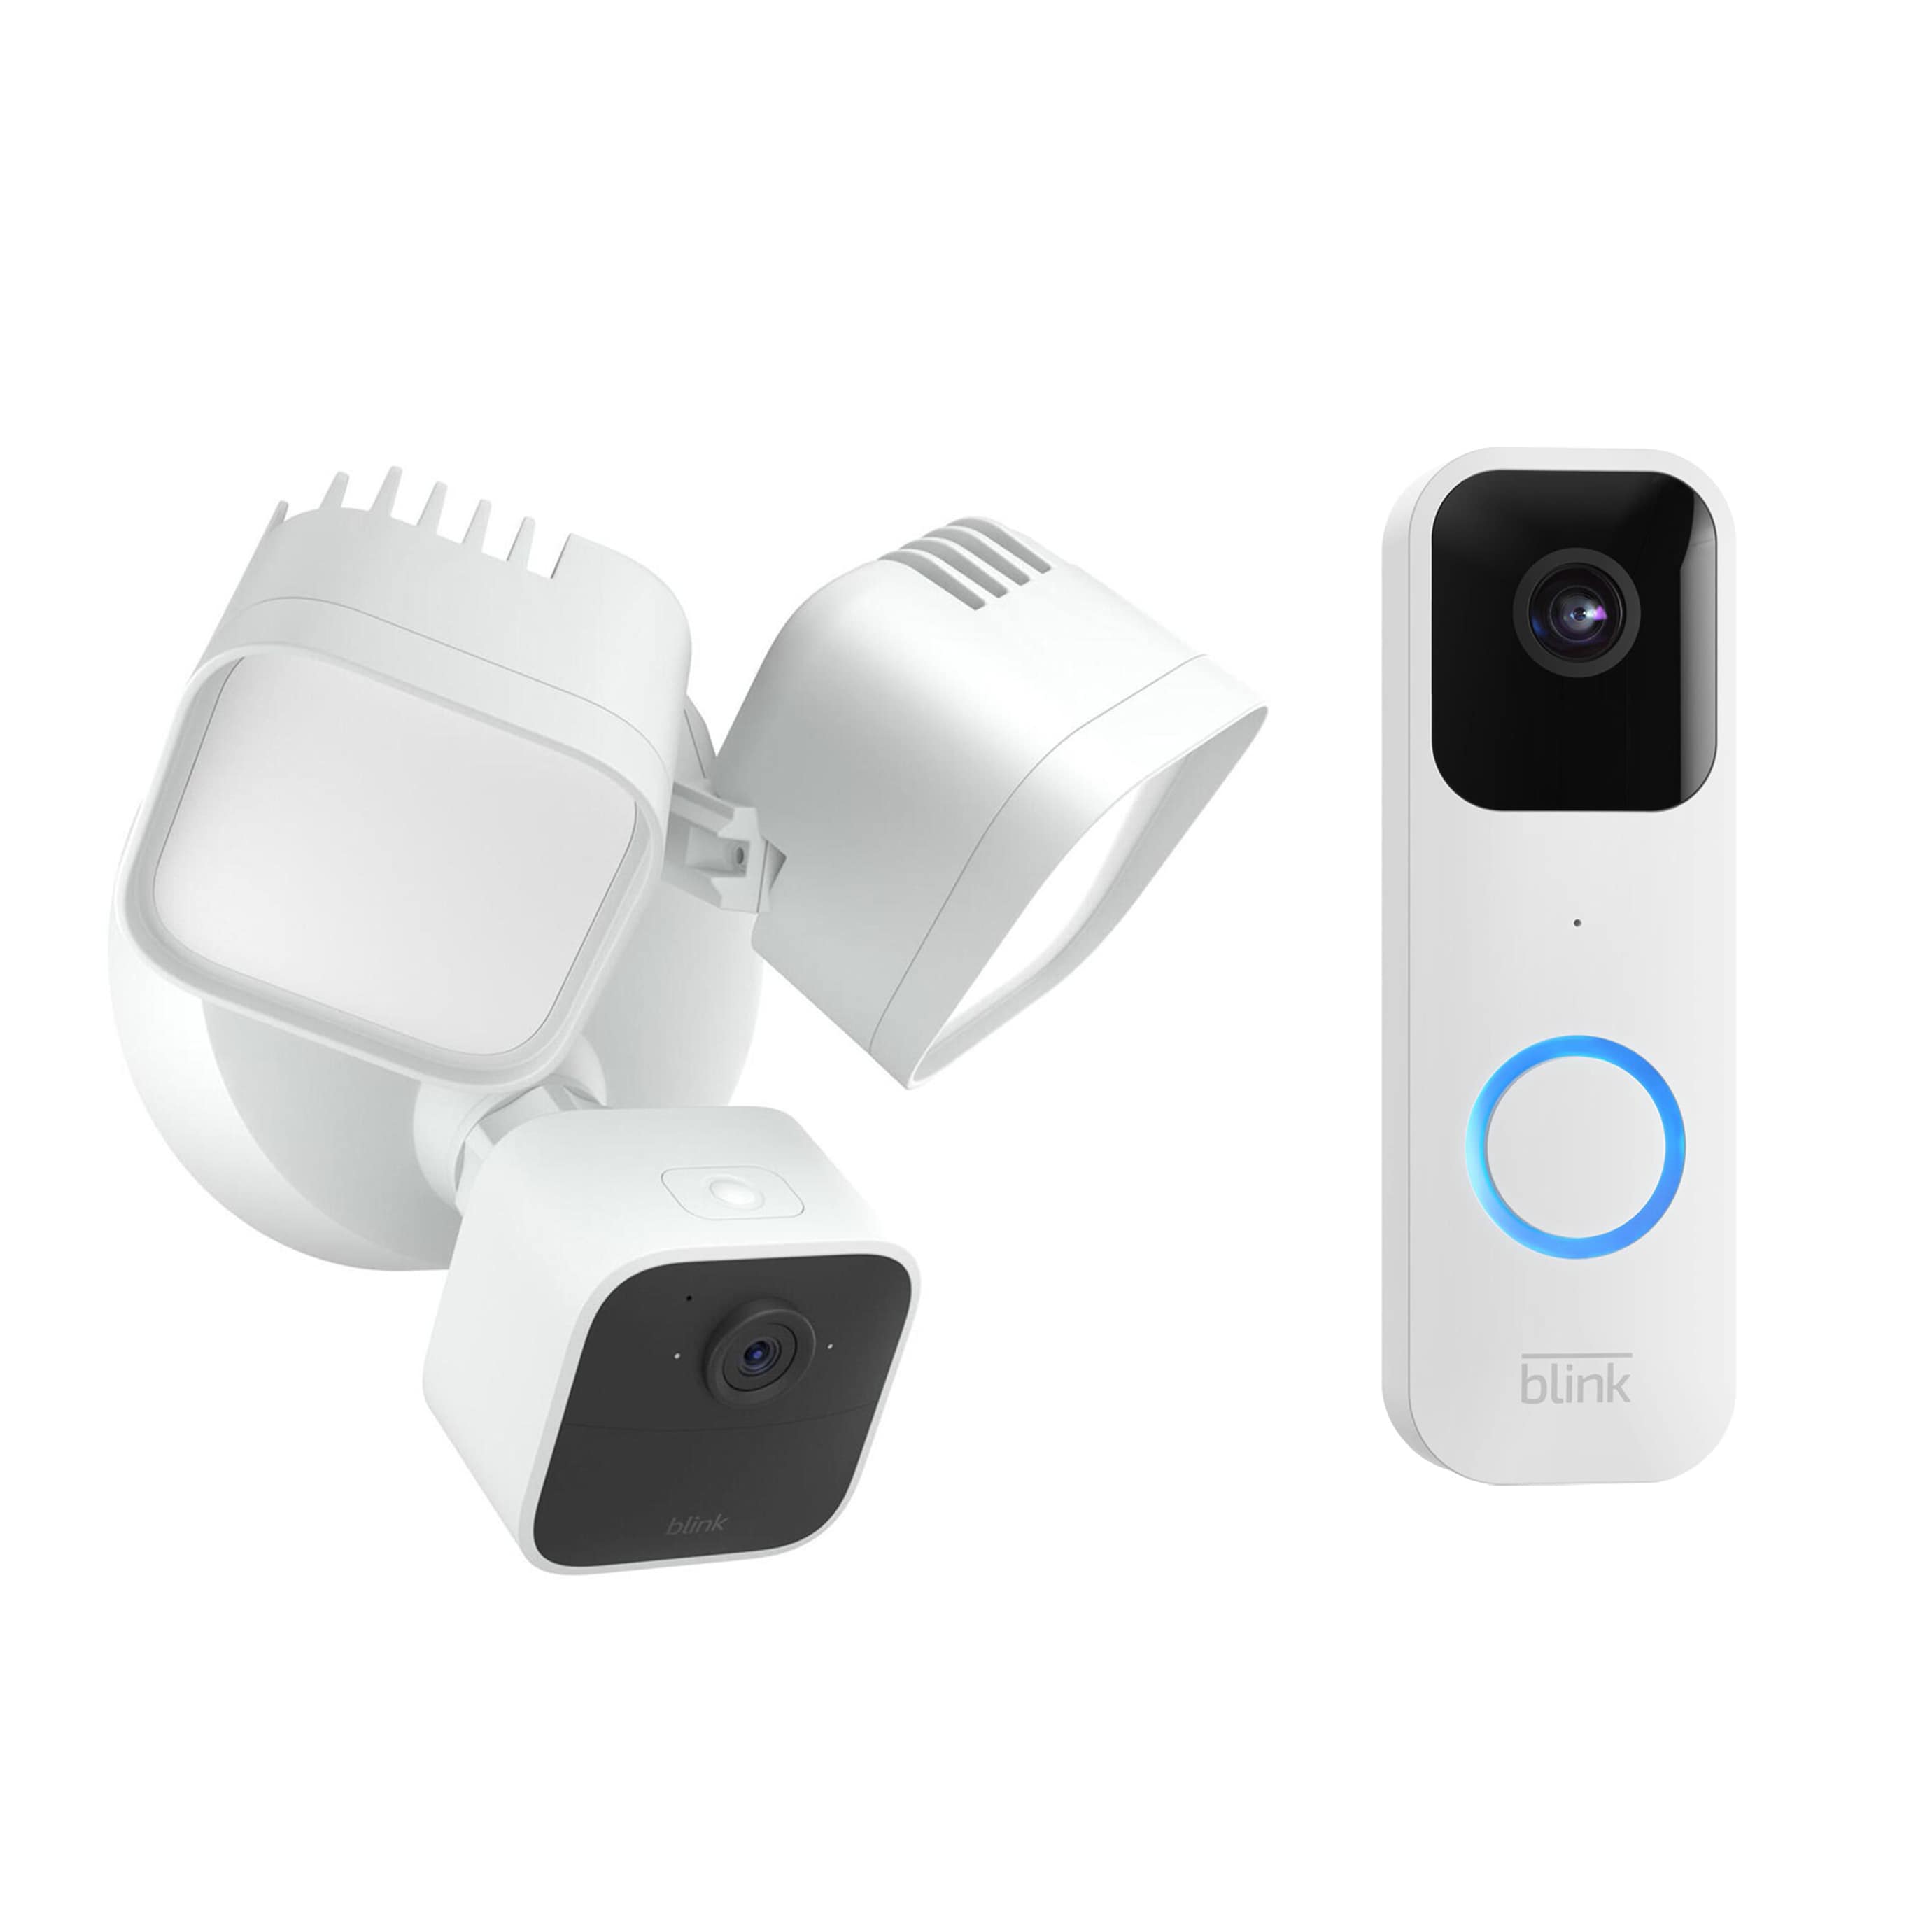 Blink Wired Floodlight Smart Security Camera, White + Wired or Wireless Smart Video Doorbell, White